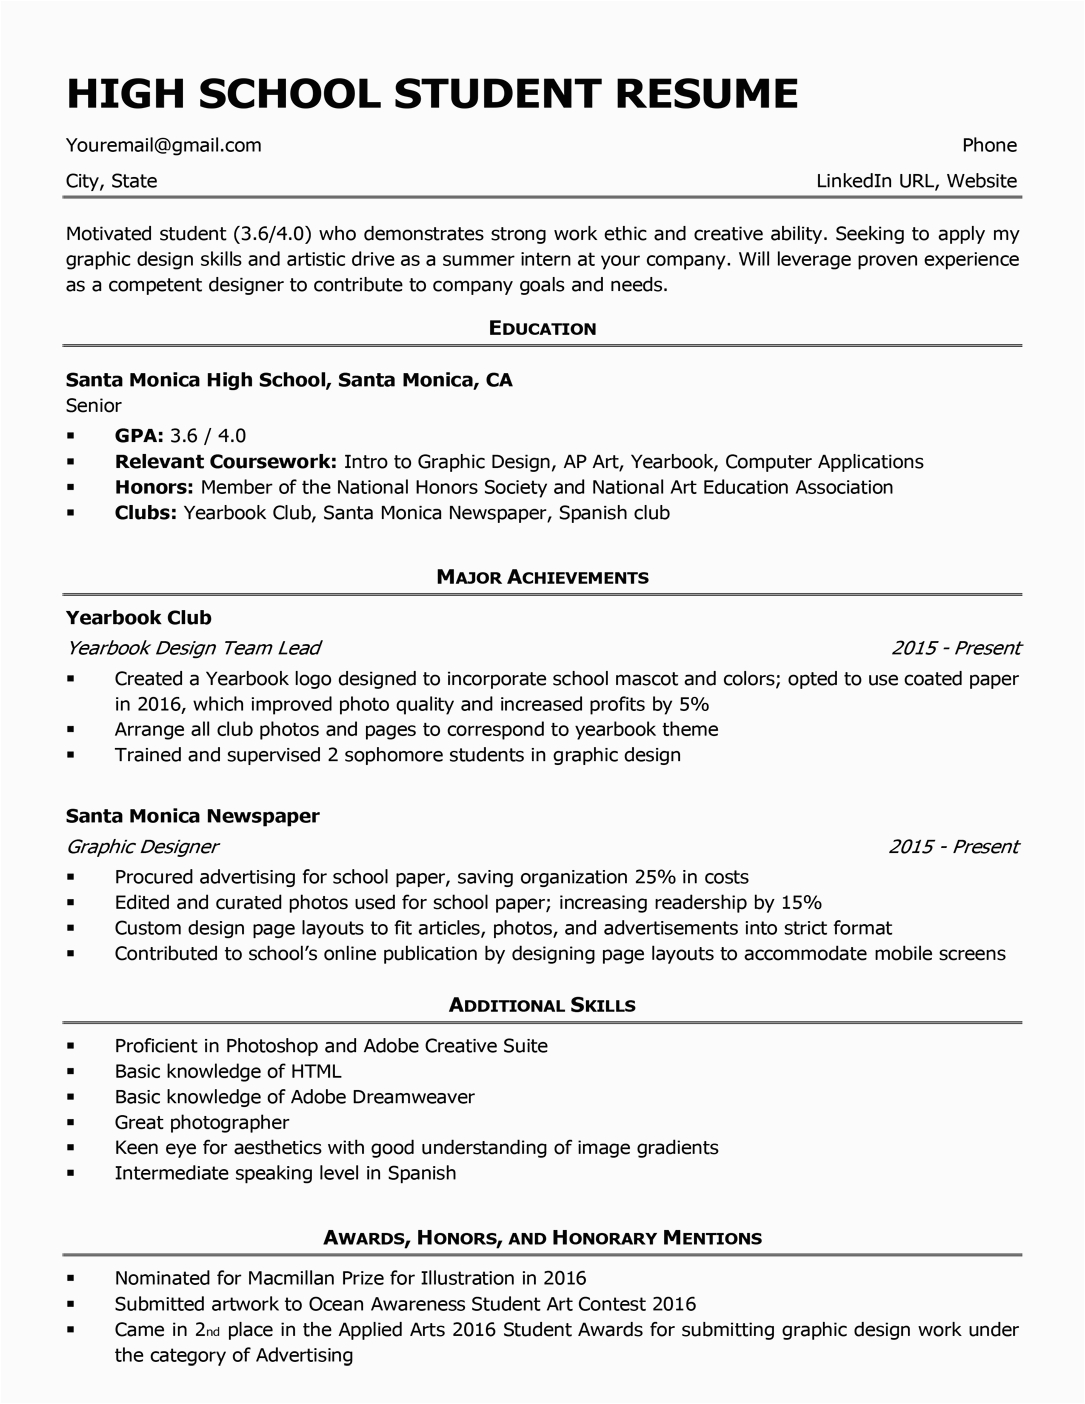 Sample First Resume for High School Student High School Resume Template & Writing Tips